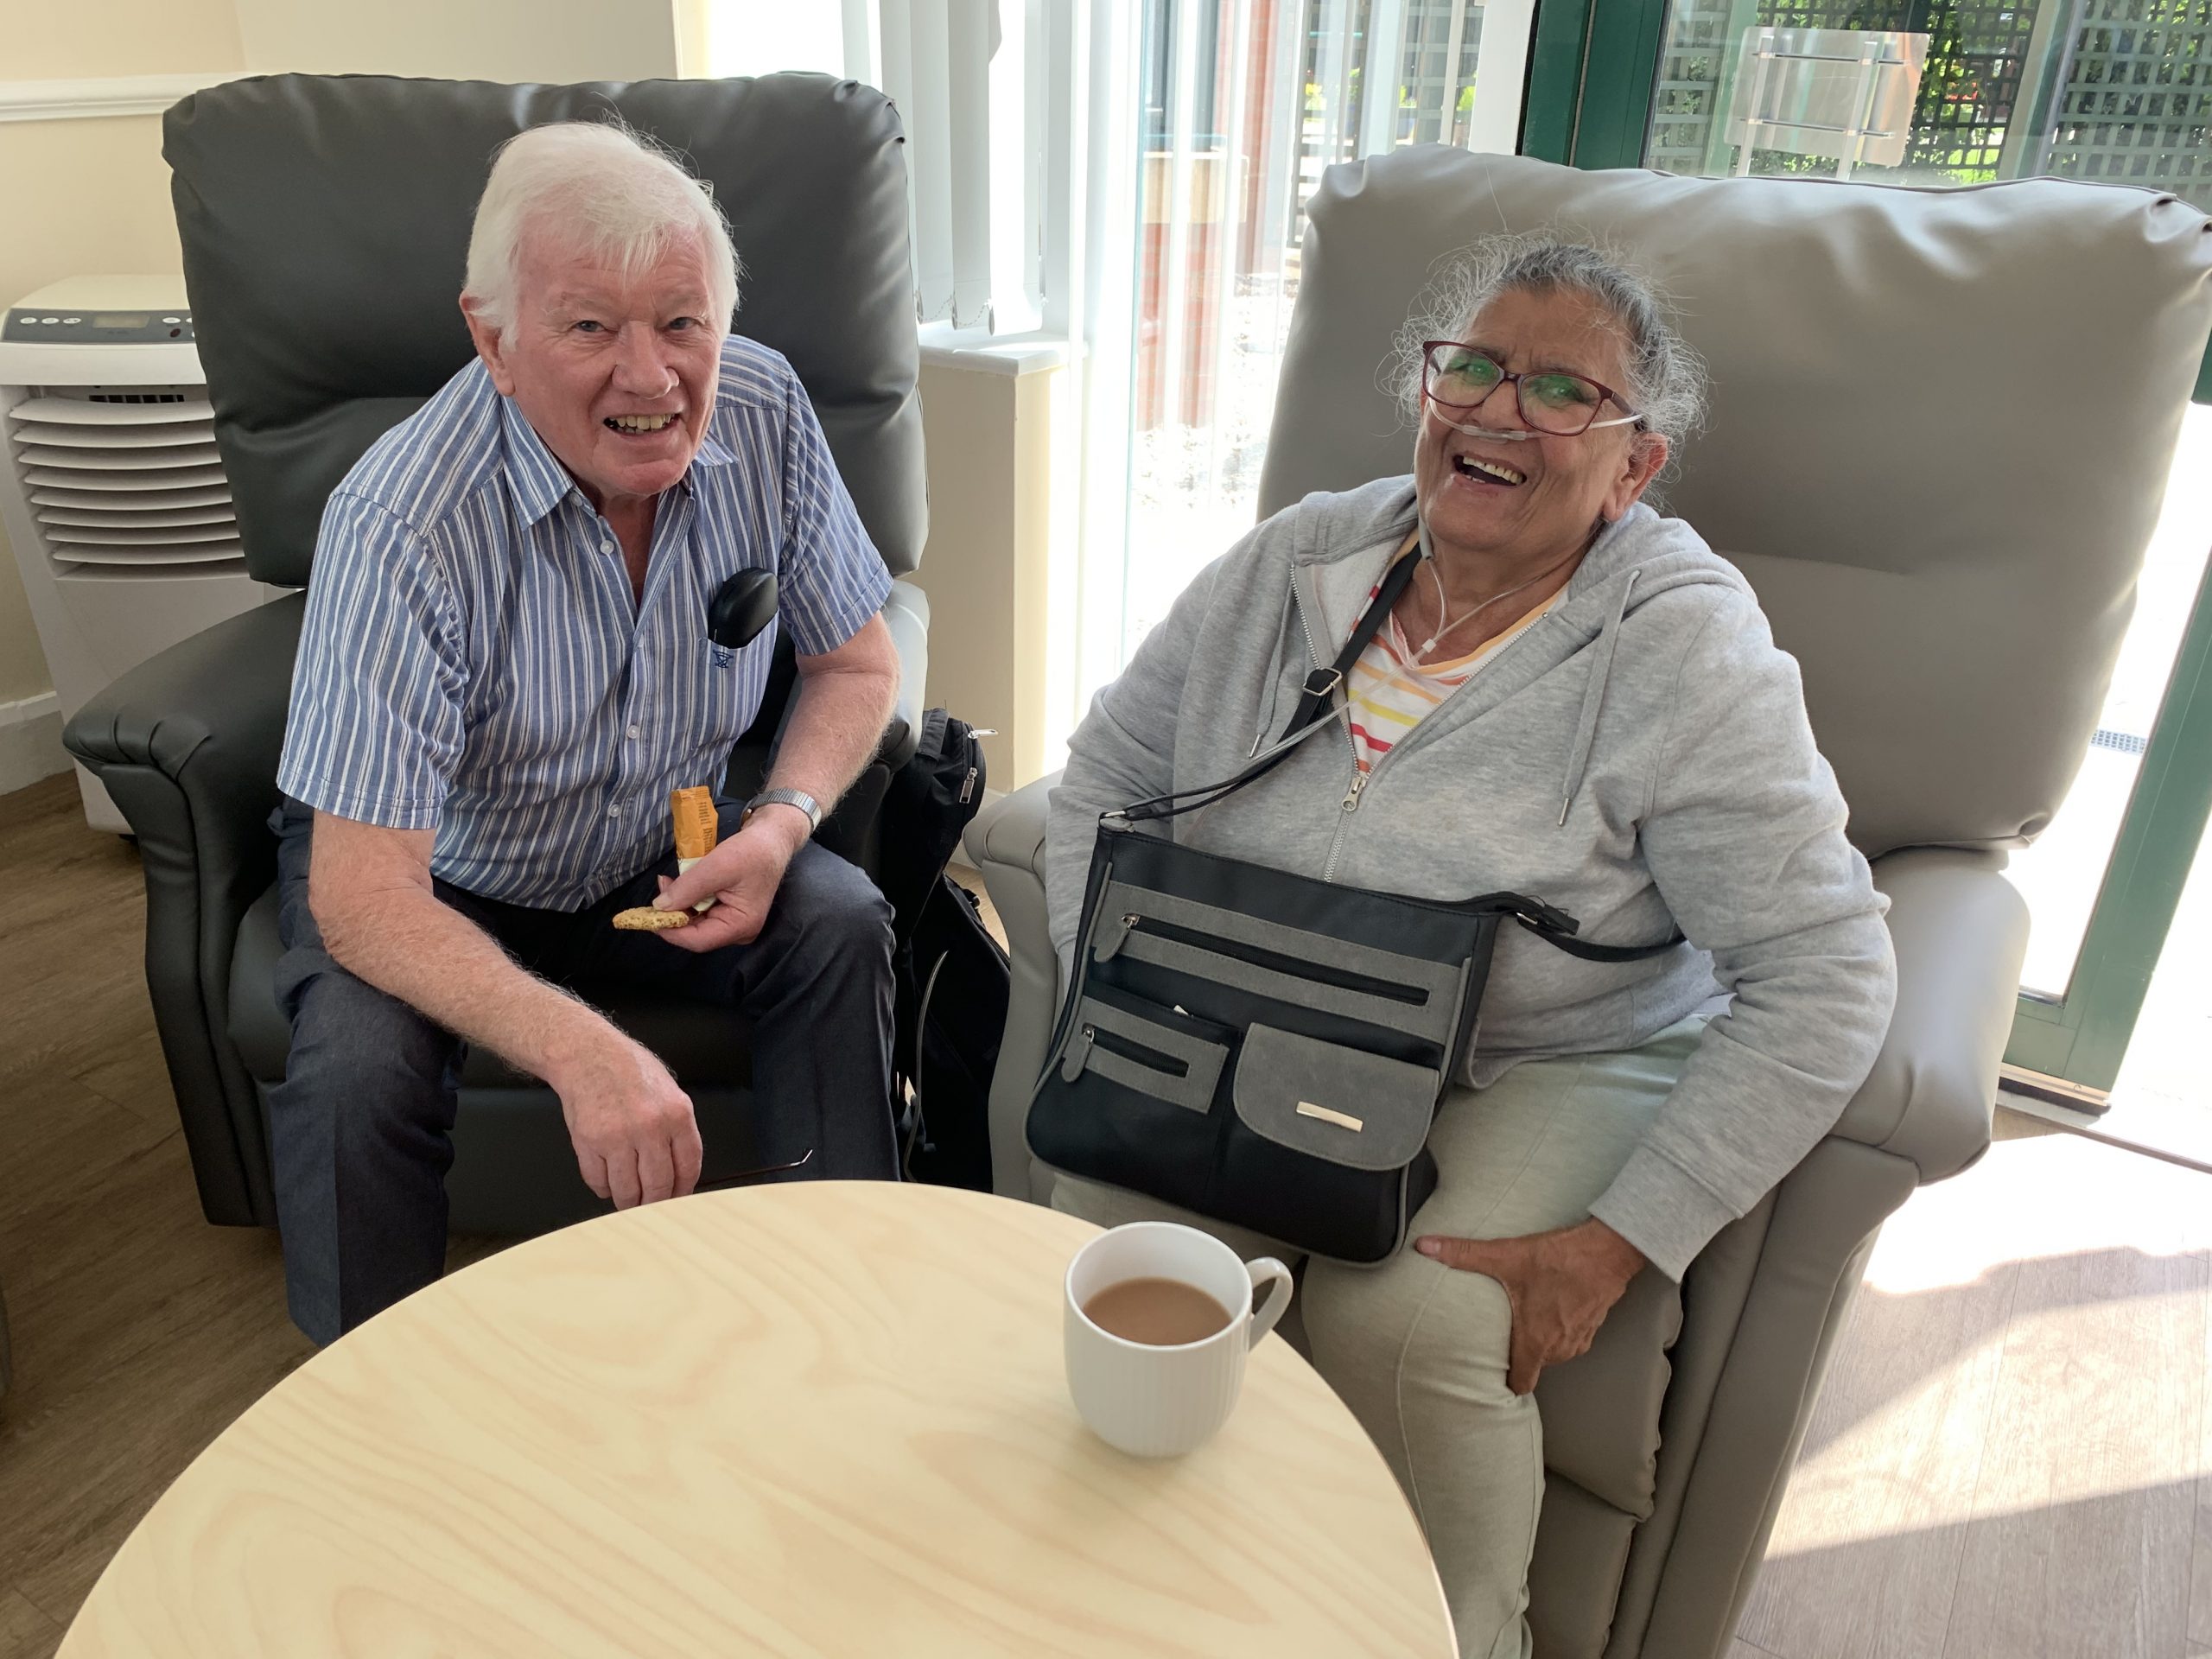 A patient and her husband at one of our coffee mornings.